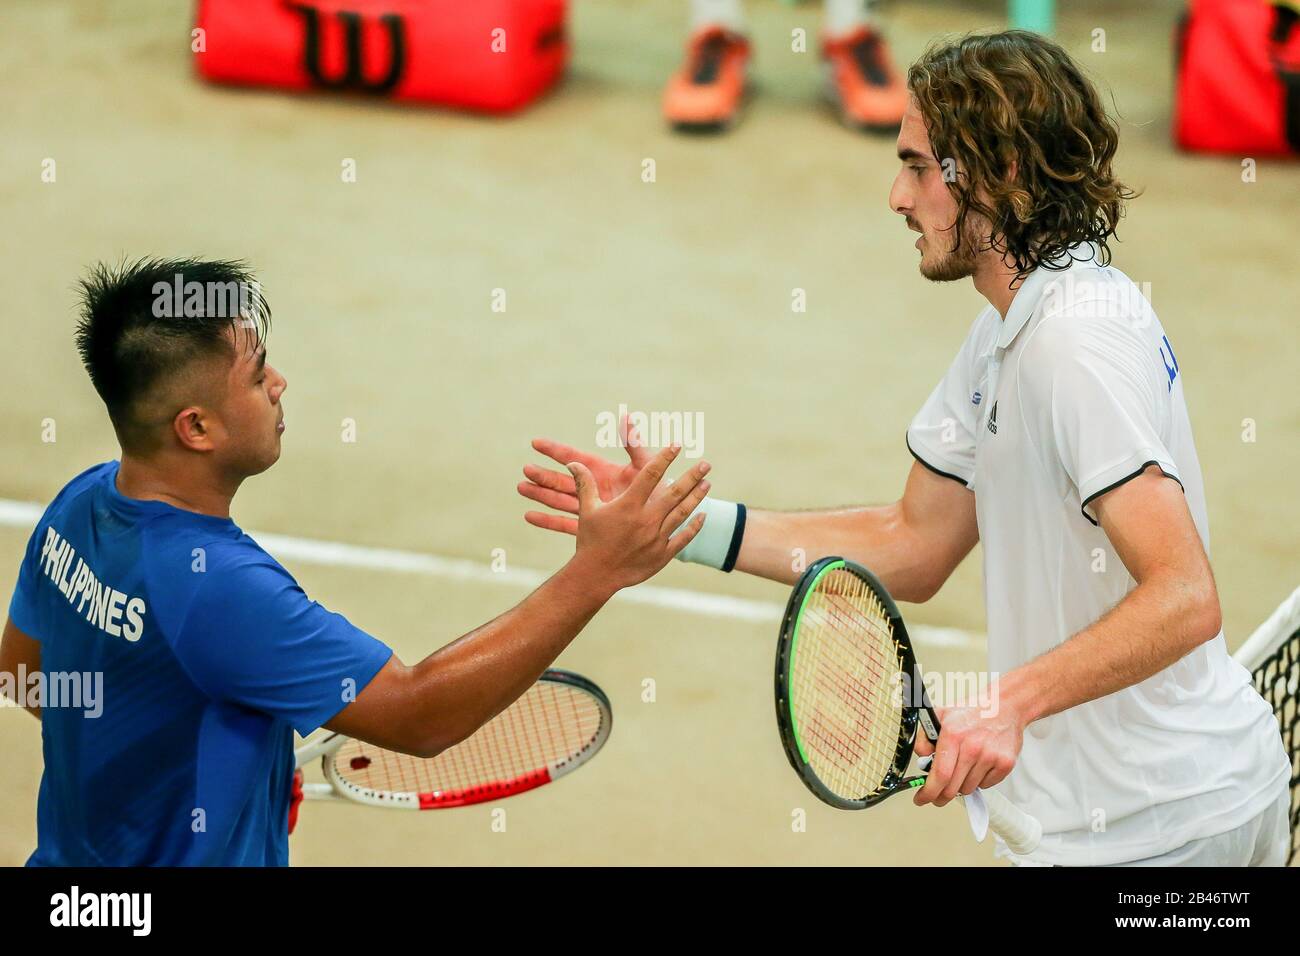 Manila. 6th Mar, 2020. Stefanos Tsitsipas (R) of Greece greets Alberto Lim of the Philippines after the singles match of Davis Cup World Group II play-off round between the Philippines and Greece in Manila, the Philippines on March 6, 2020. Credit: Rouelle Umali/Xinhua/Alamy Live News Stock Photo